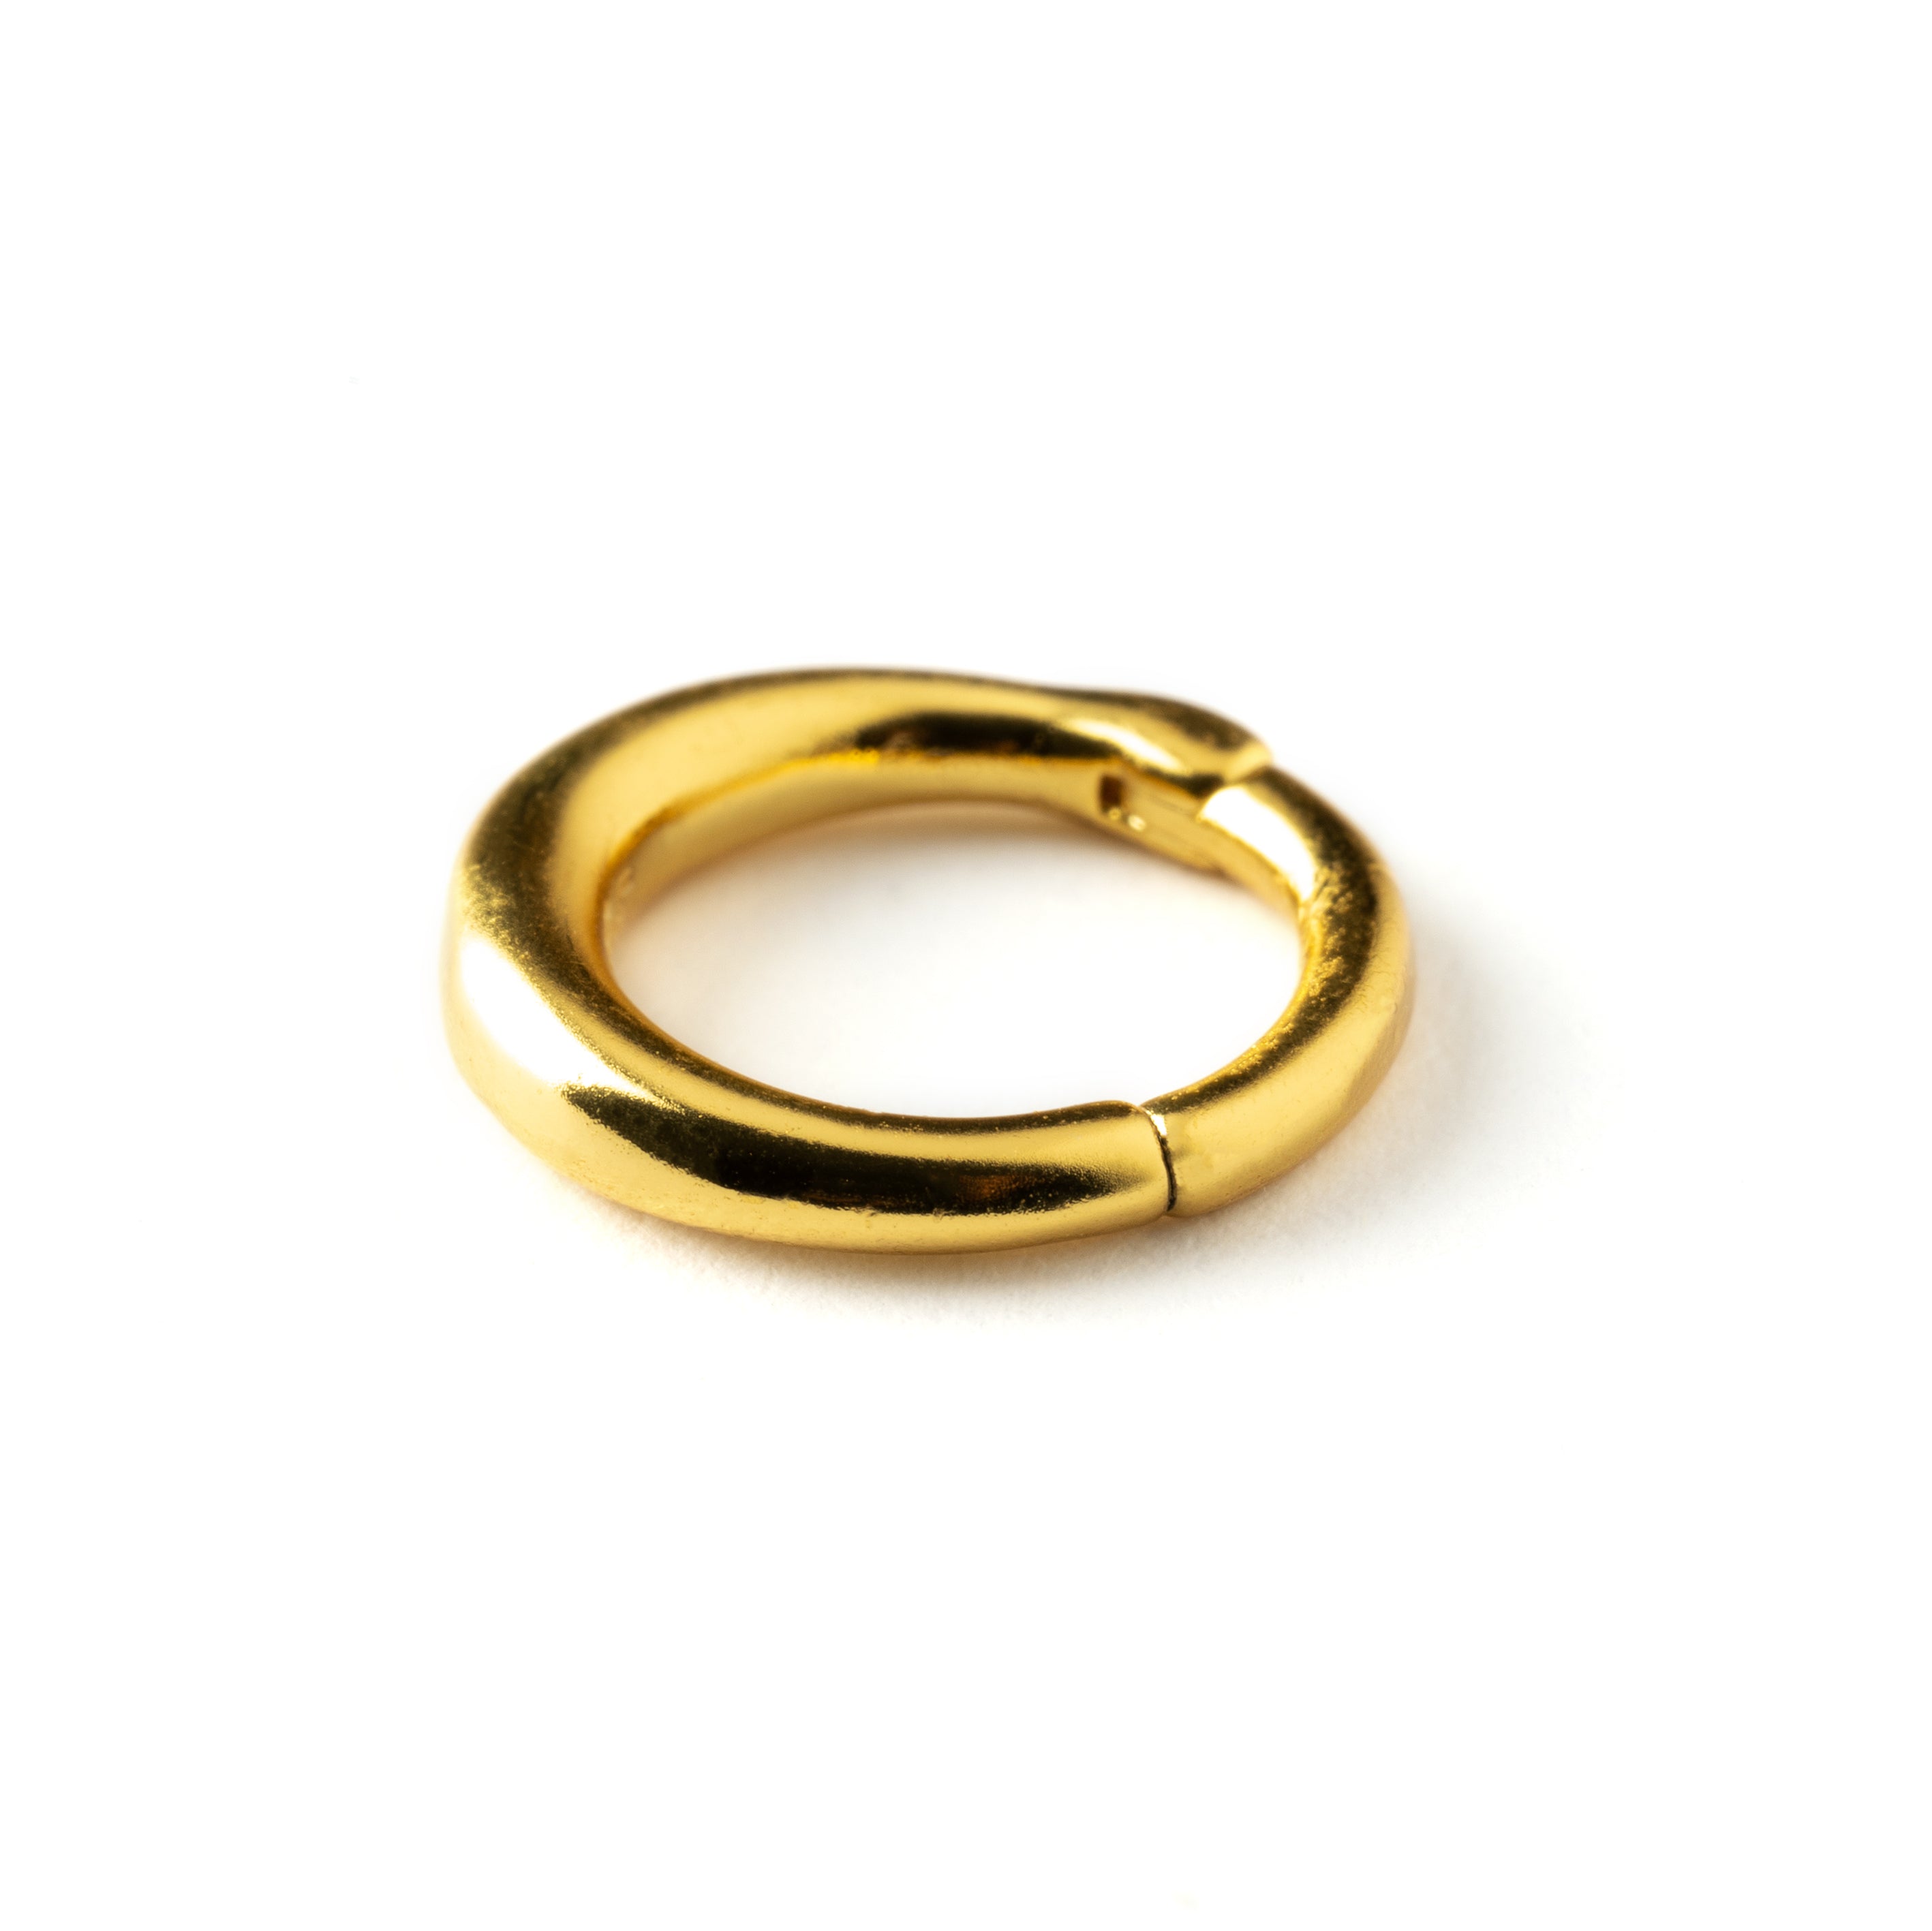 Raja gold surgical steel septum clicker ring side view